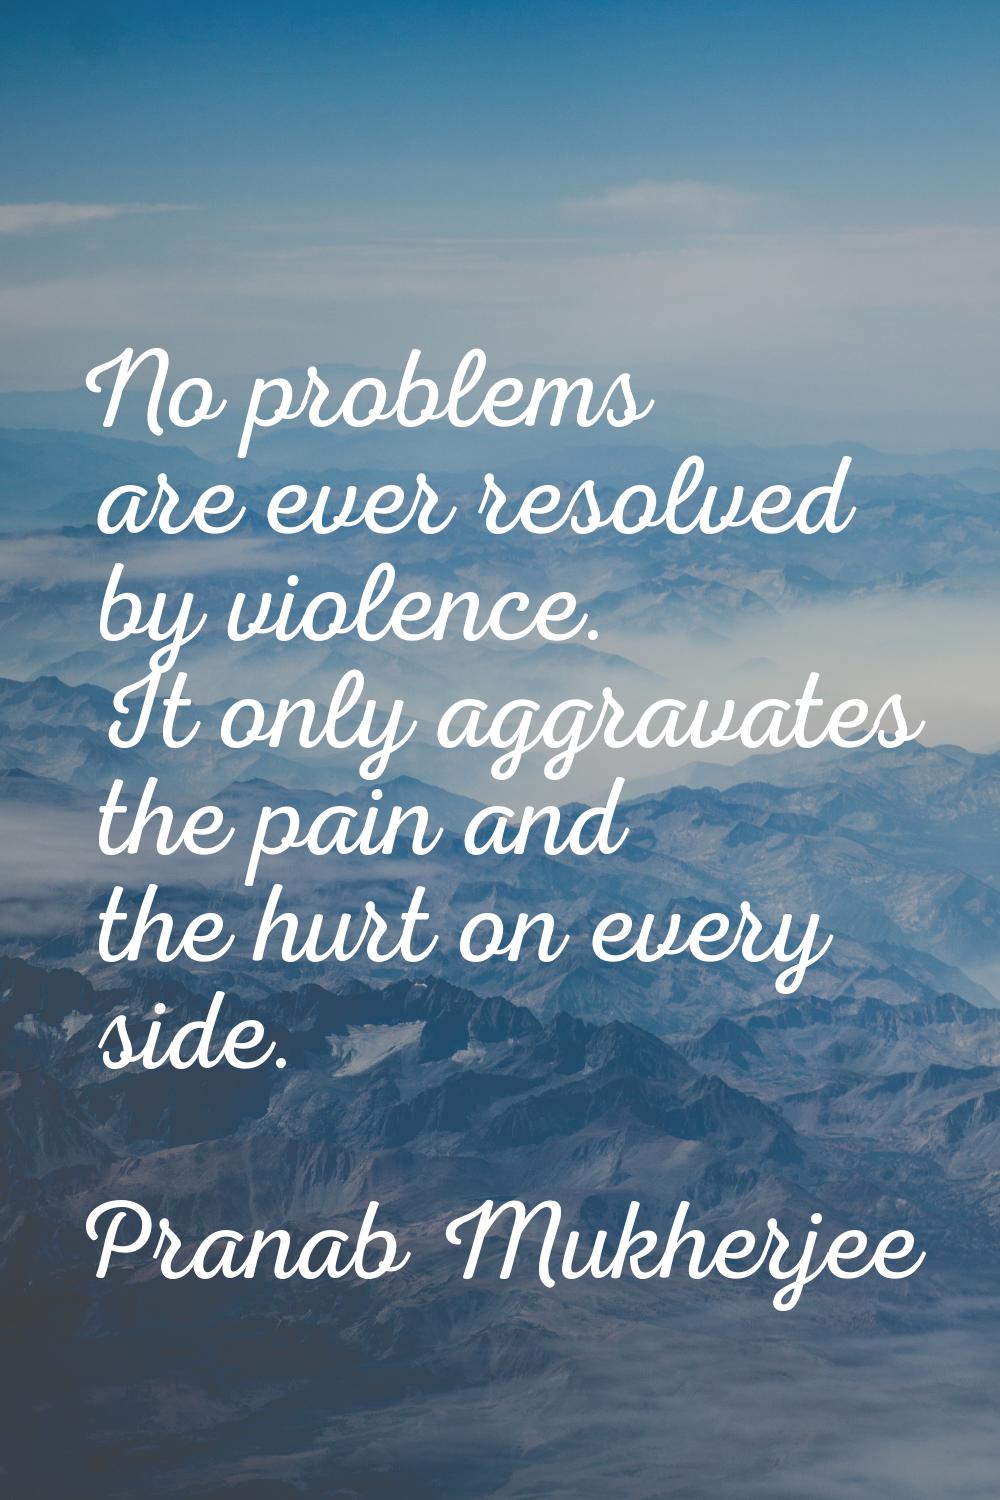 No problems are ever resolved by violence. It only aggravates the pain and the hurt on every side.